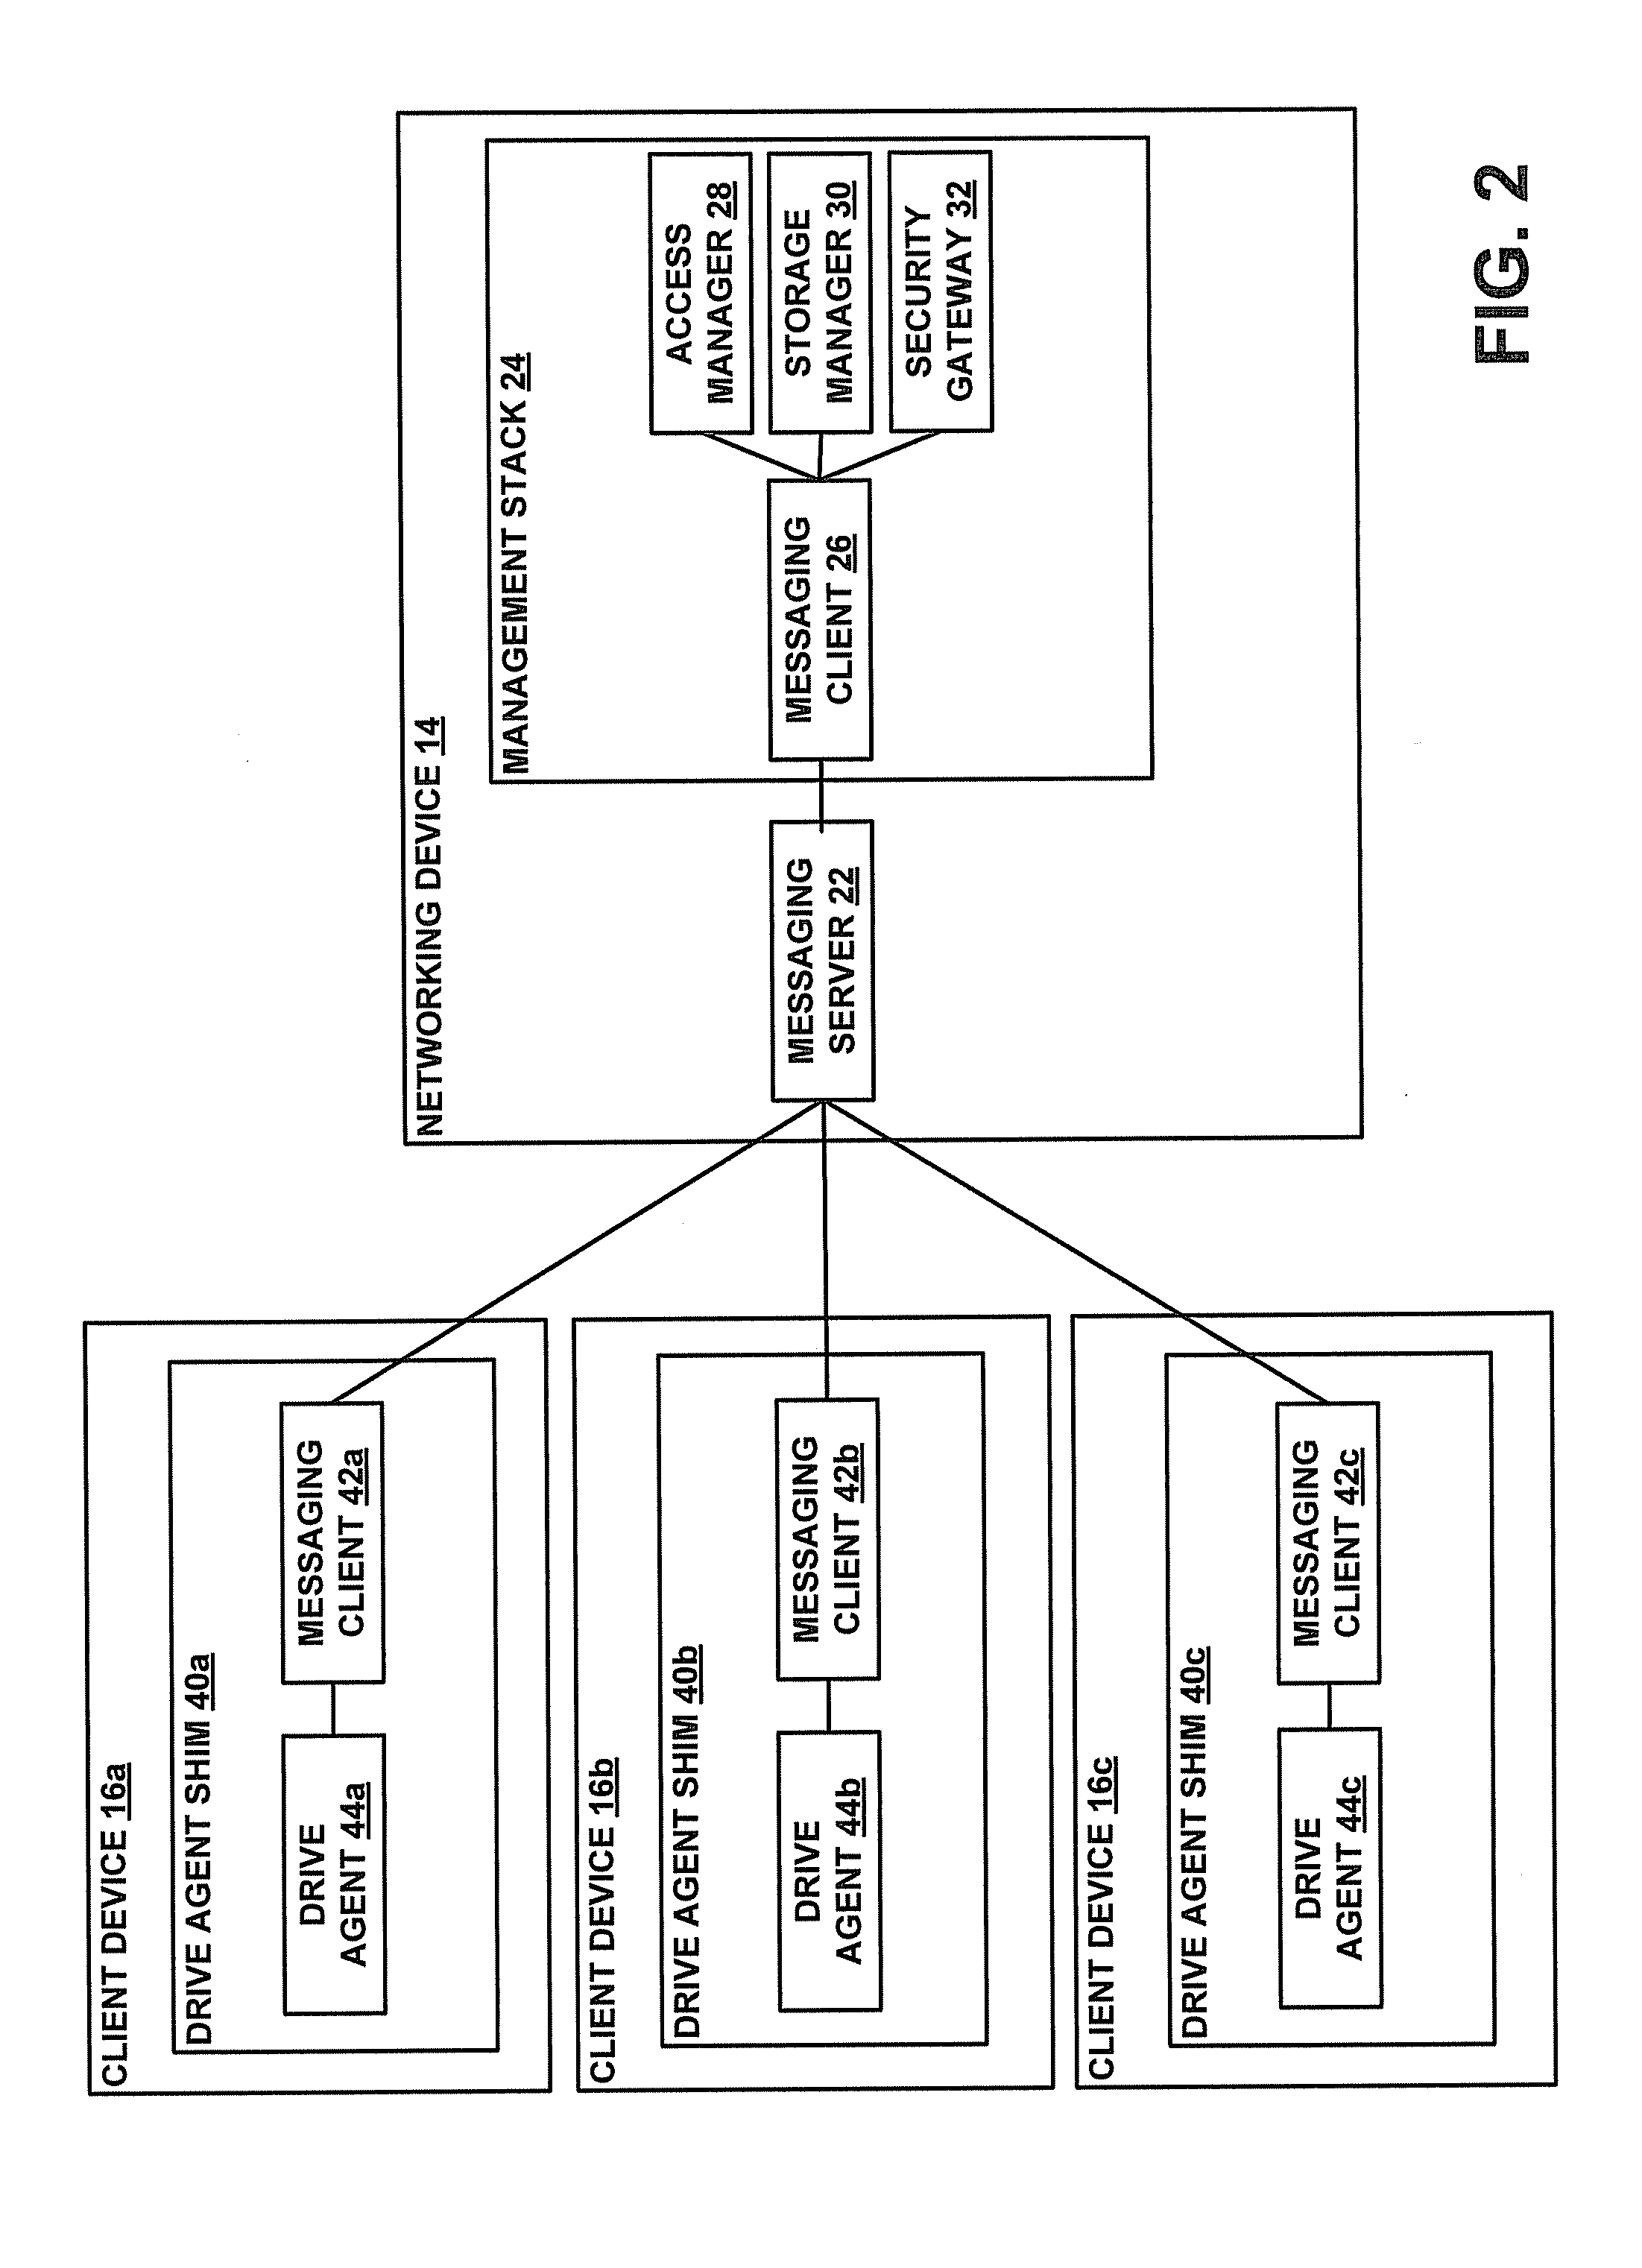 System and Method of Accessing Resources in a Computer Network